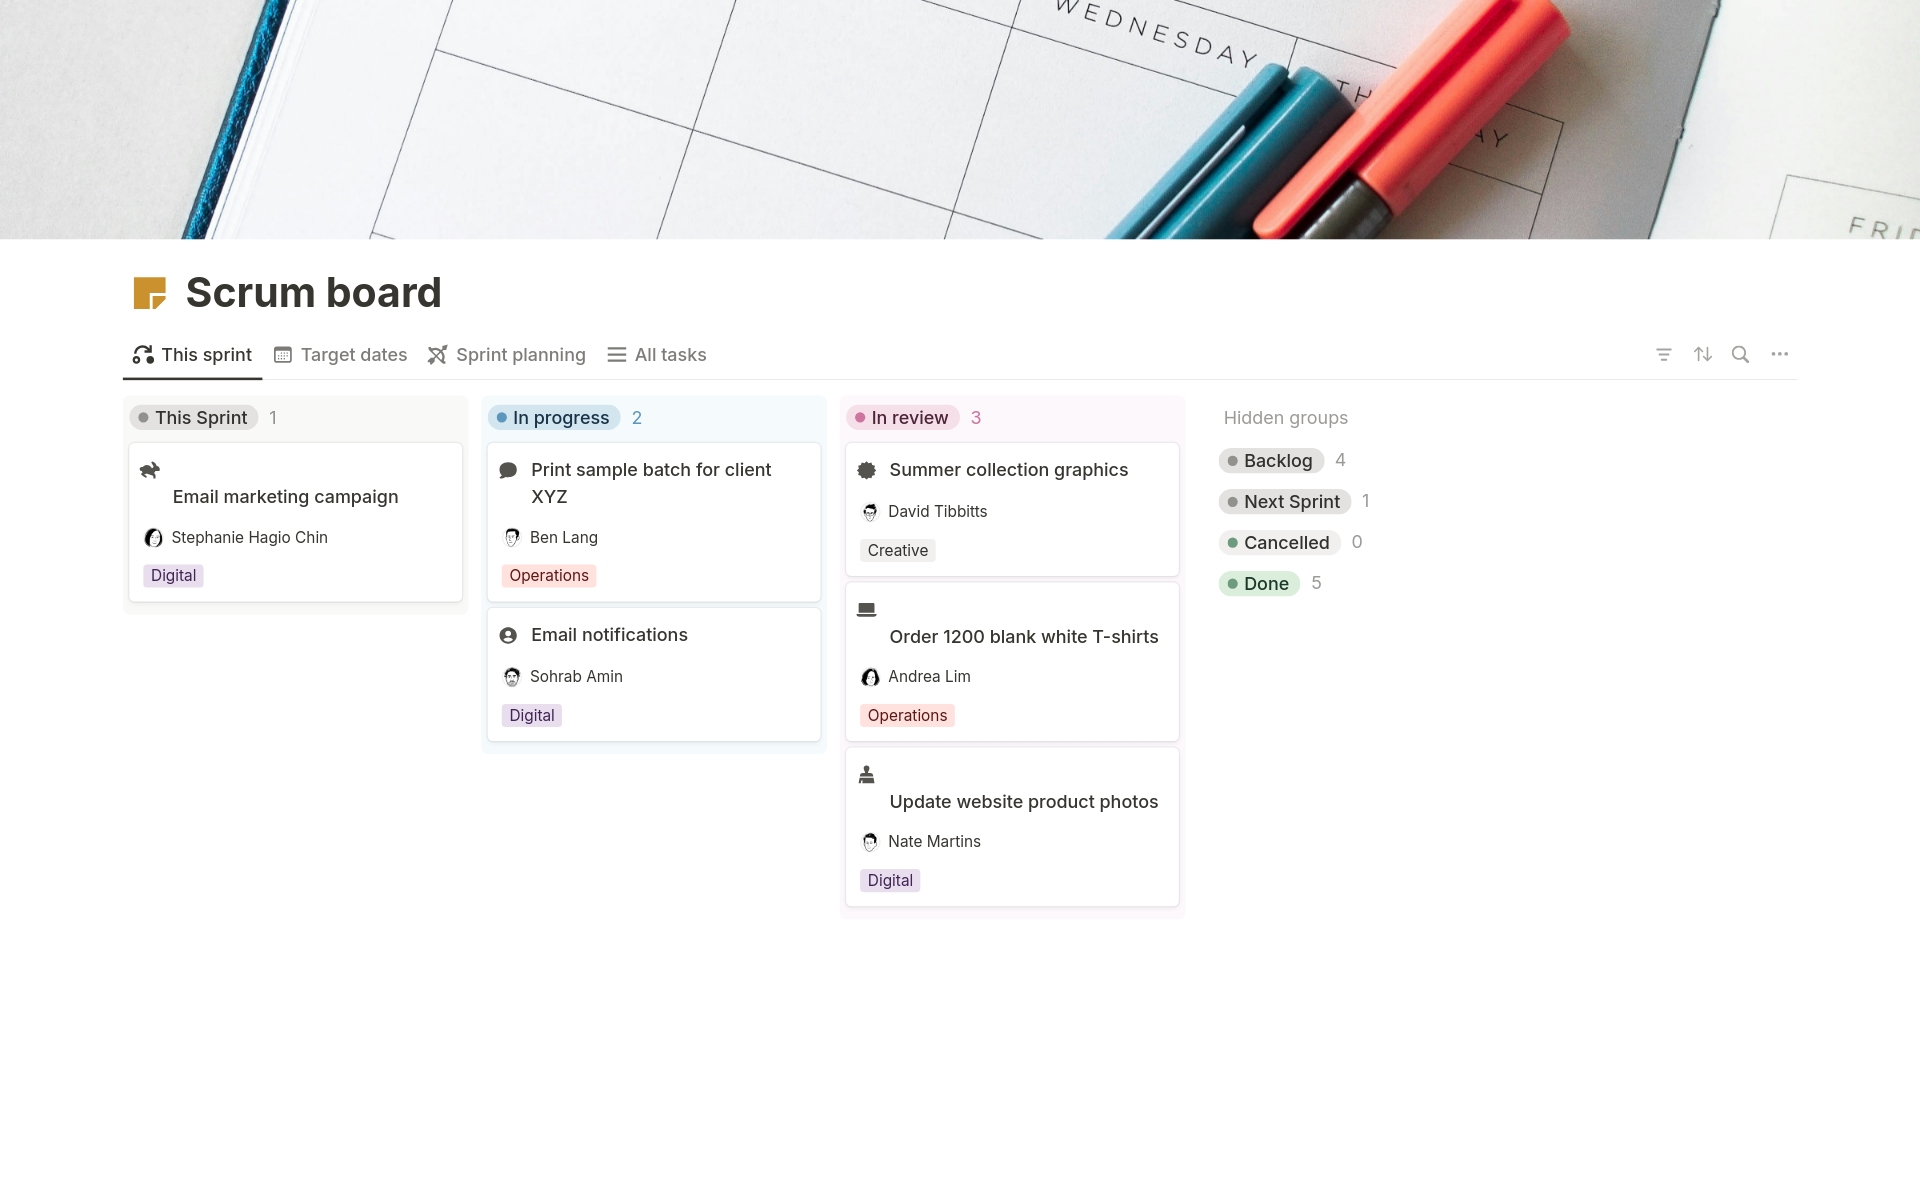 A Scrum board for small companies to aid standups, sprint planning, and tracking target dates.